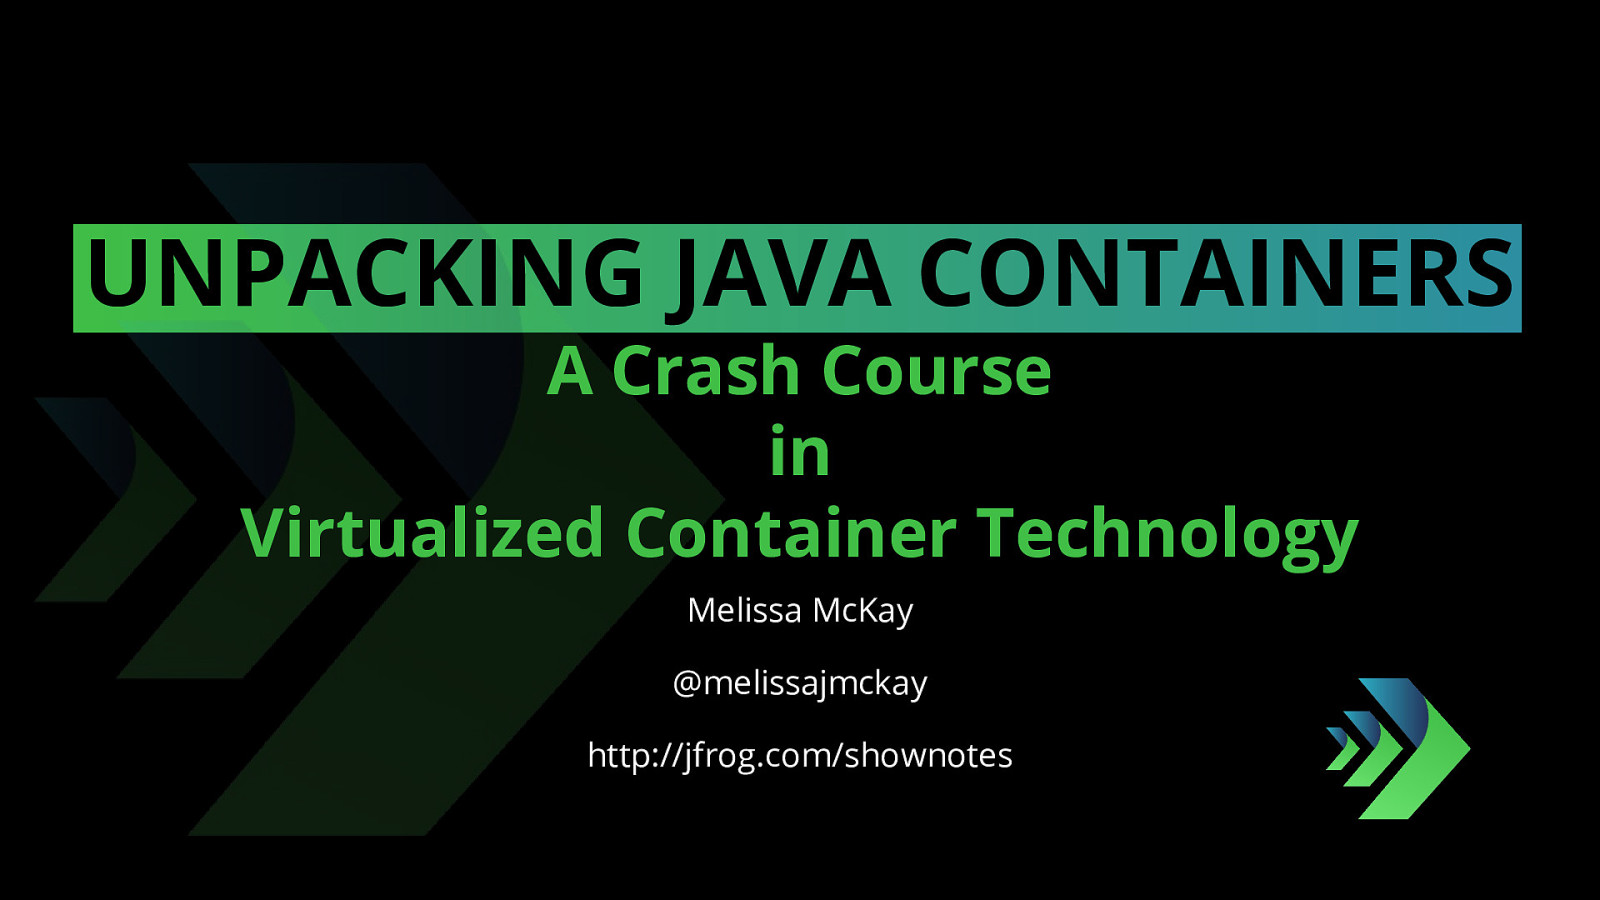 Unpacking Java Containers: A Crash Course in Virtualized Container Technology